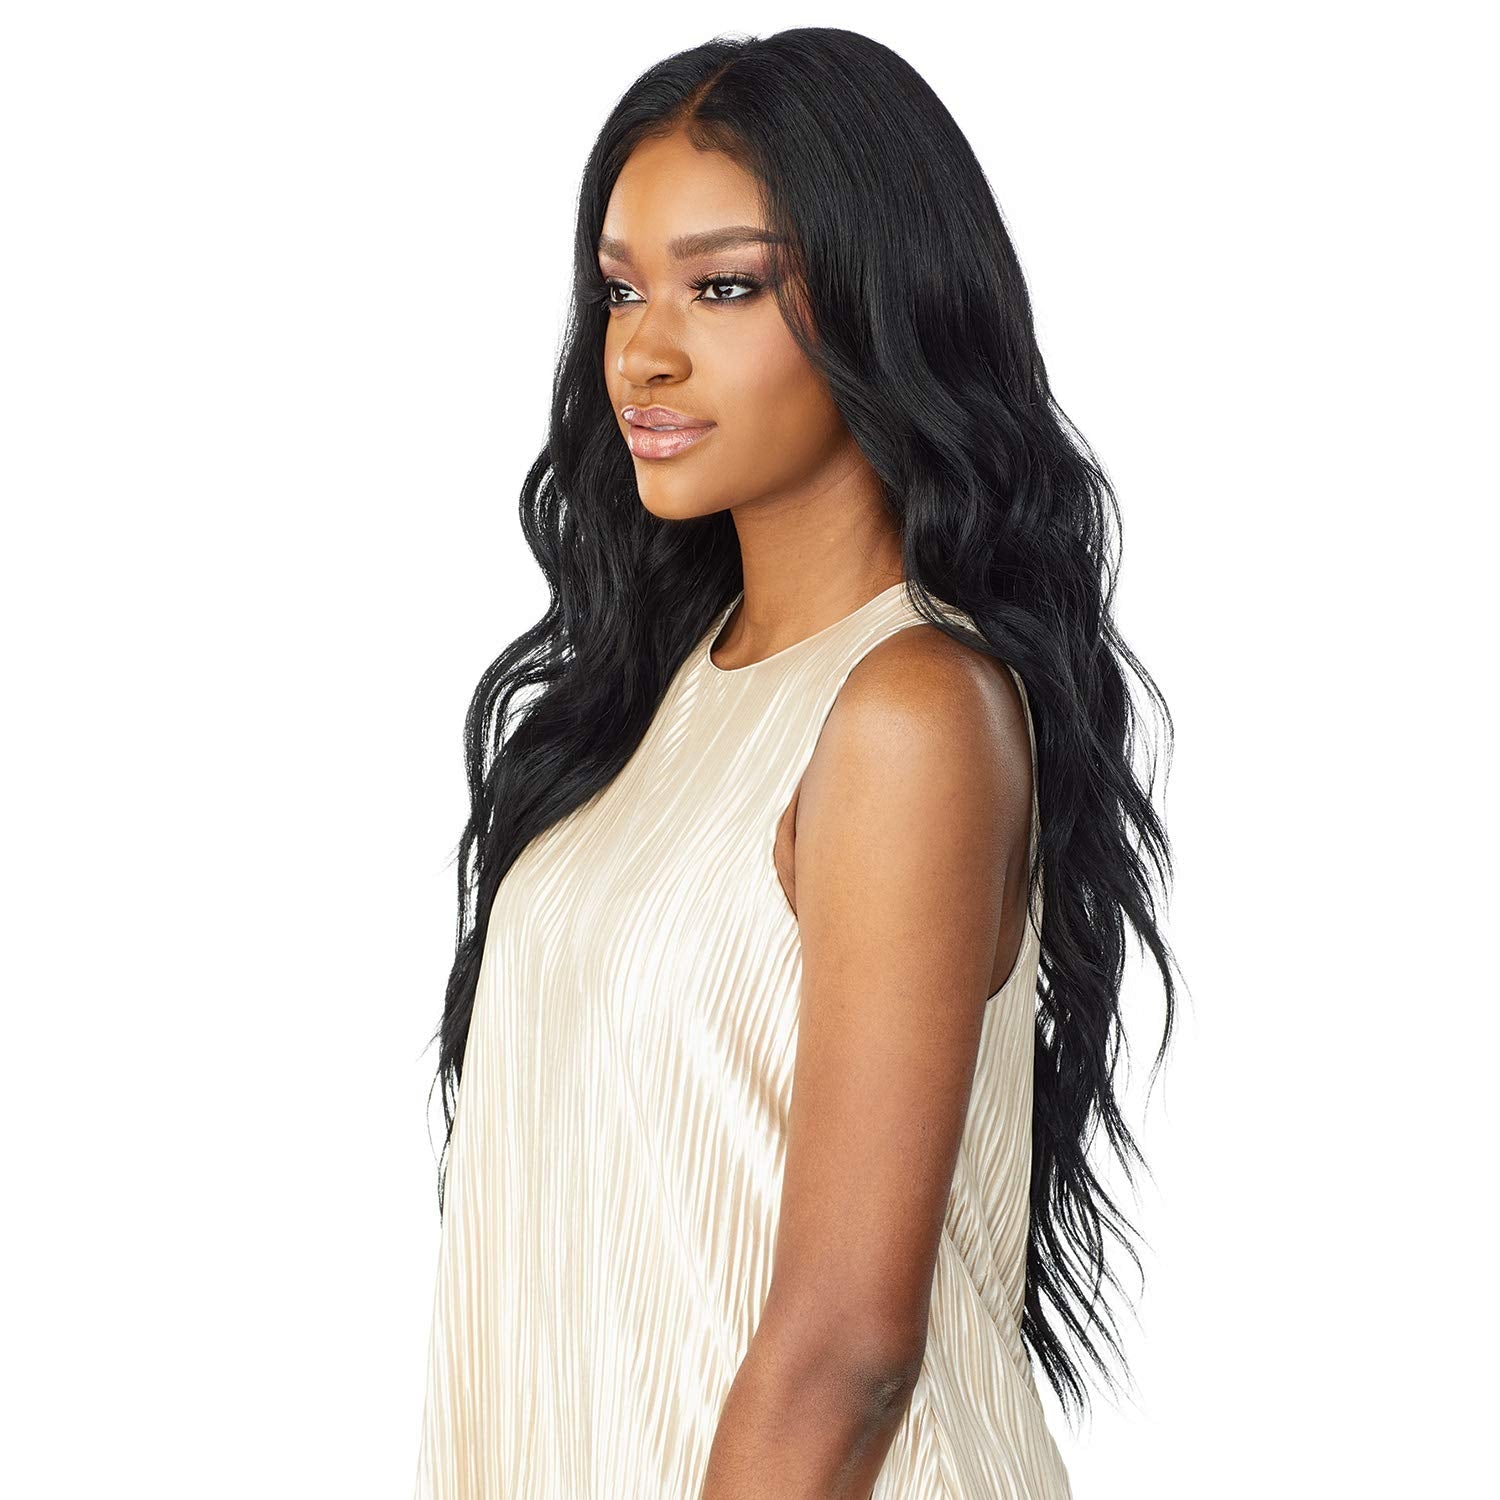 Sensationnel WHAT LACE 13x6 Wigs - Cloud 9 Synthetic Hair Hand Tied Natural Preplucked Hairline Illusion Lace Frontal Lacewig -Whatlace BRIELLE (1) Find Your New Look Today!